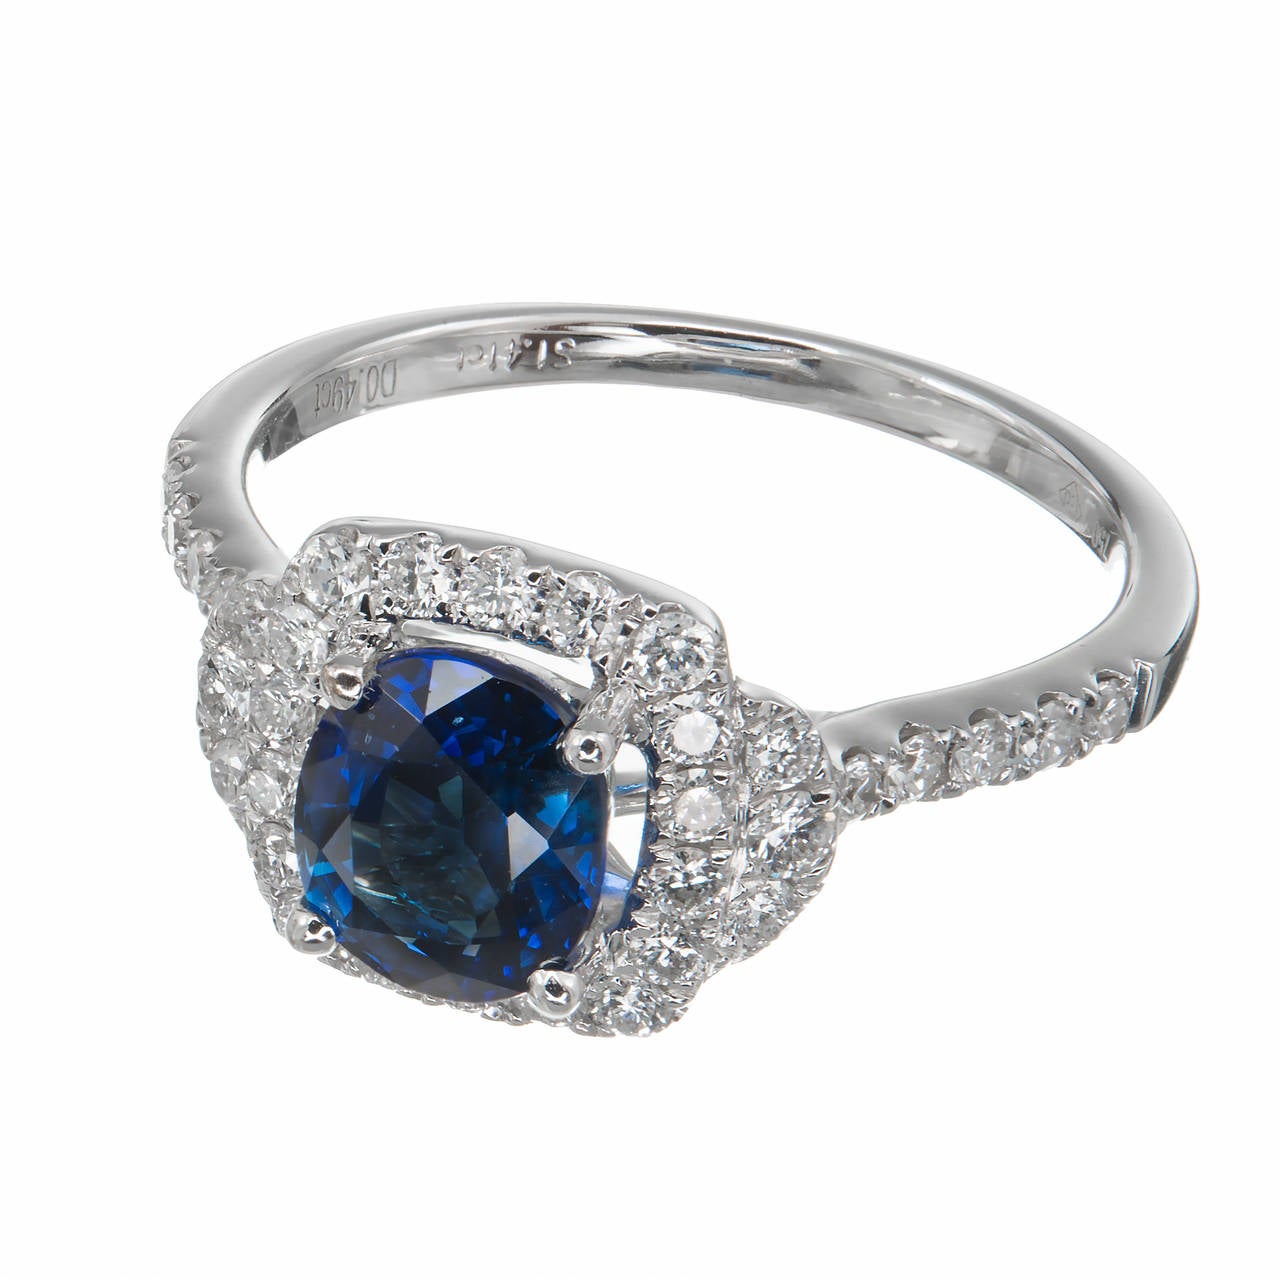 Bright, crisp, pure blue cushion cut Sapphire and diamond halo engagement  ring. Beautiful white full cut diamonds. Certified simple heat only, no other enhancements.

1 cushion blue Sapphire, approx. total weight 1.41cts, simple heat only, no other